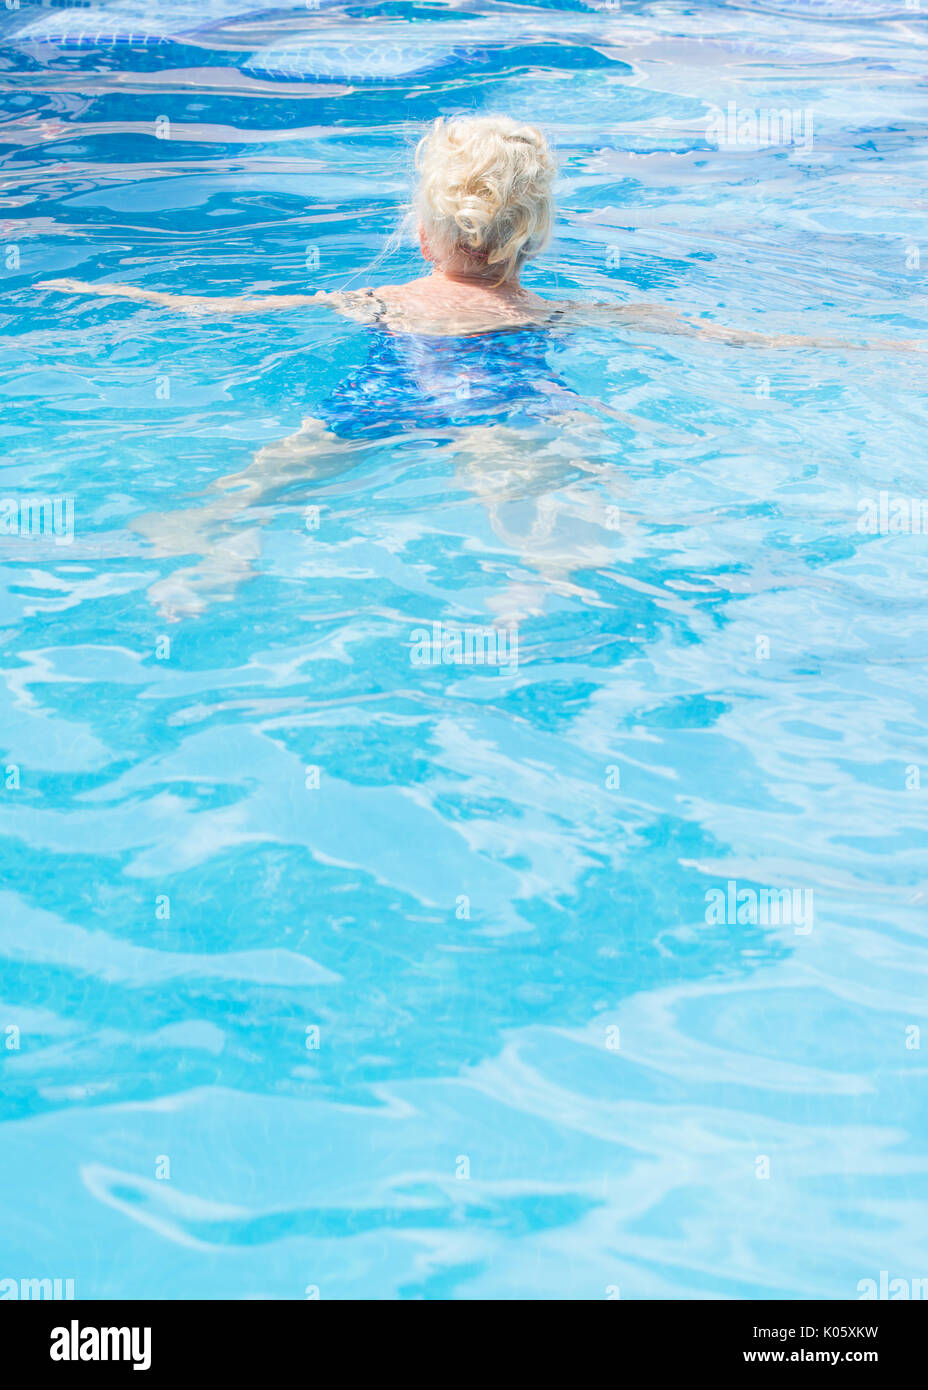 elderly woman swimming in outdoor pool Stock Photo